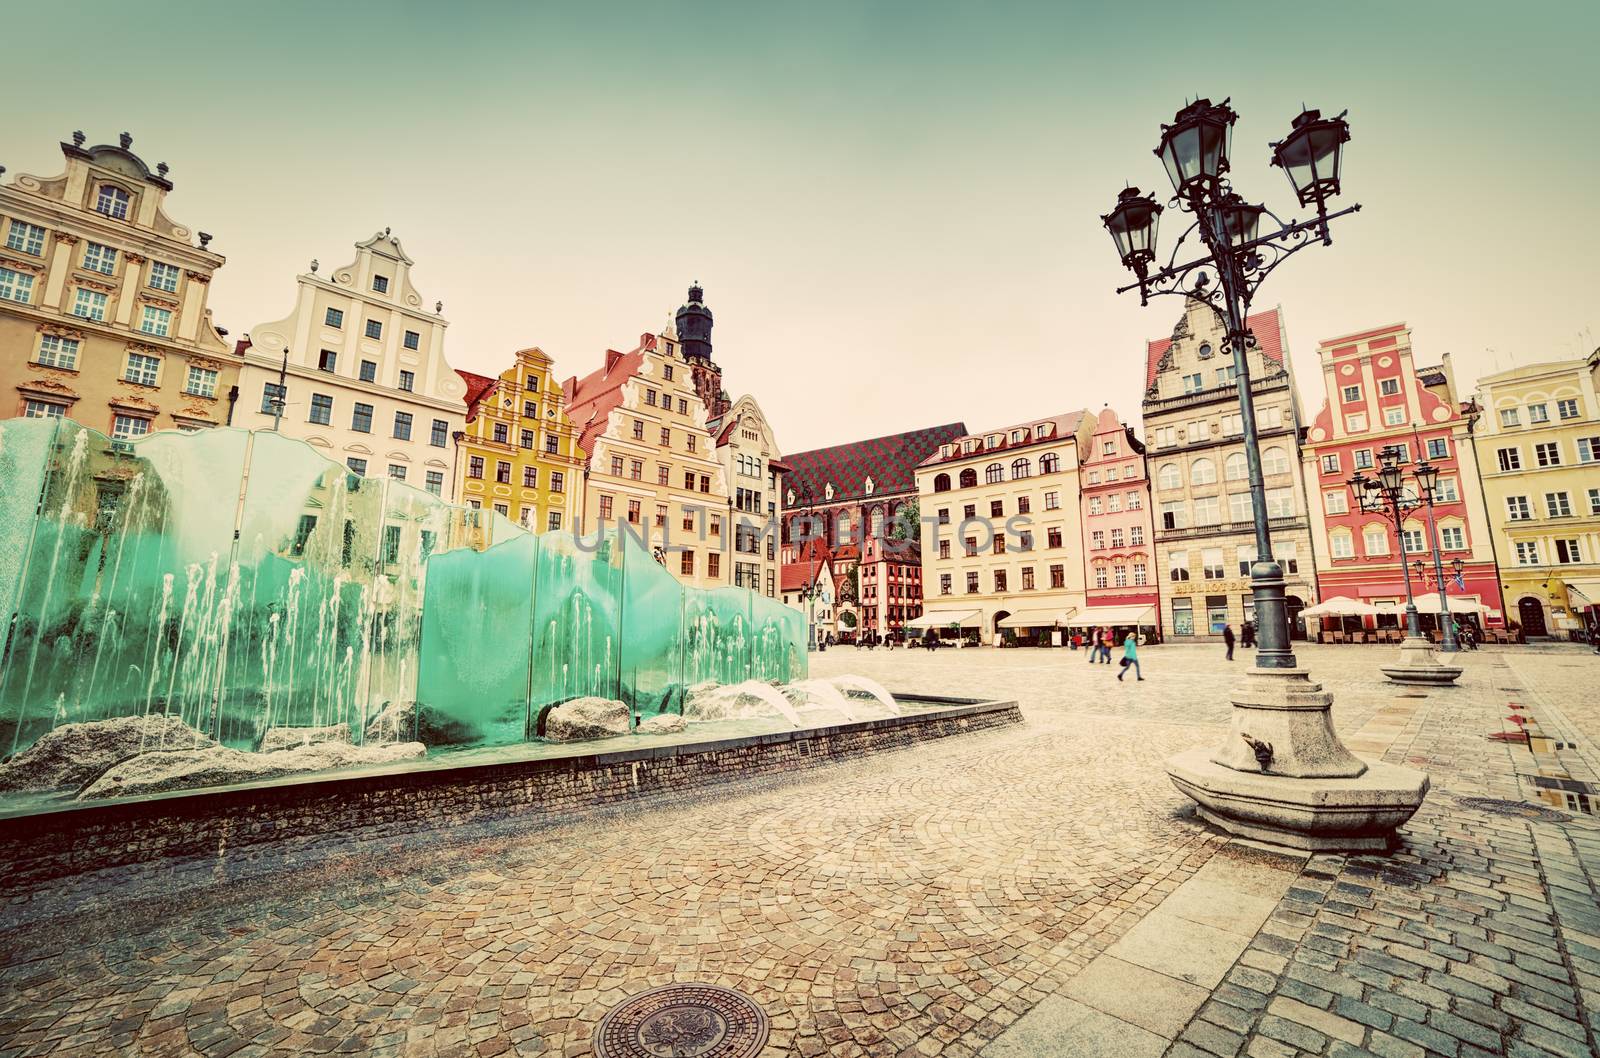 Wroclaw, Poland. The market square with the famous fountain by photocreo